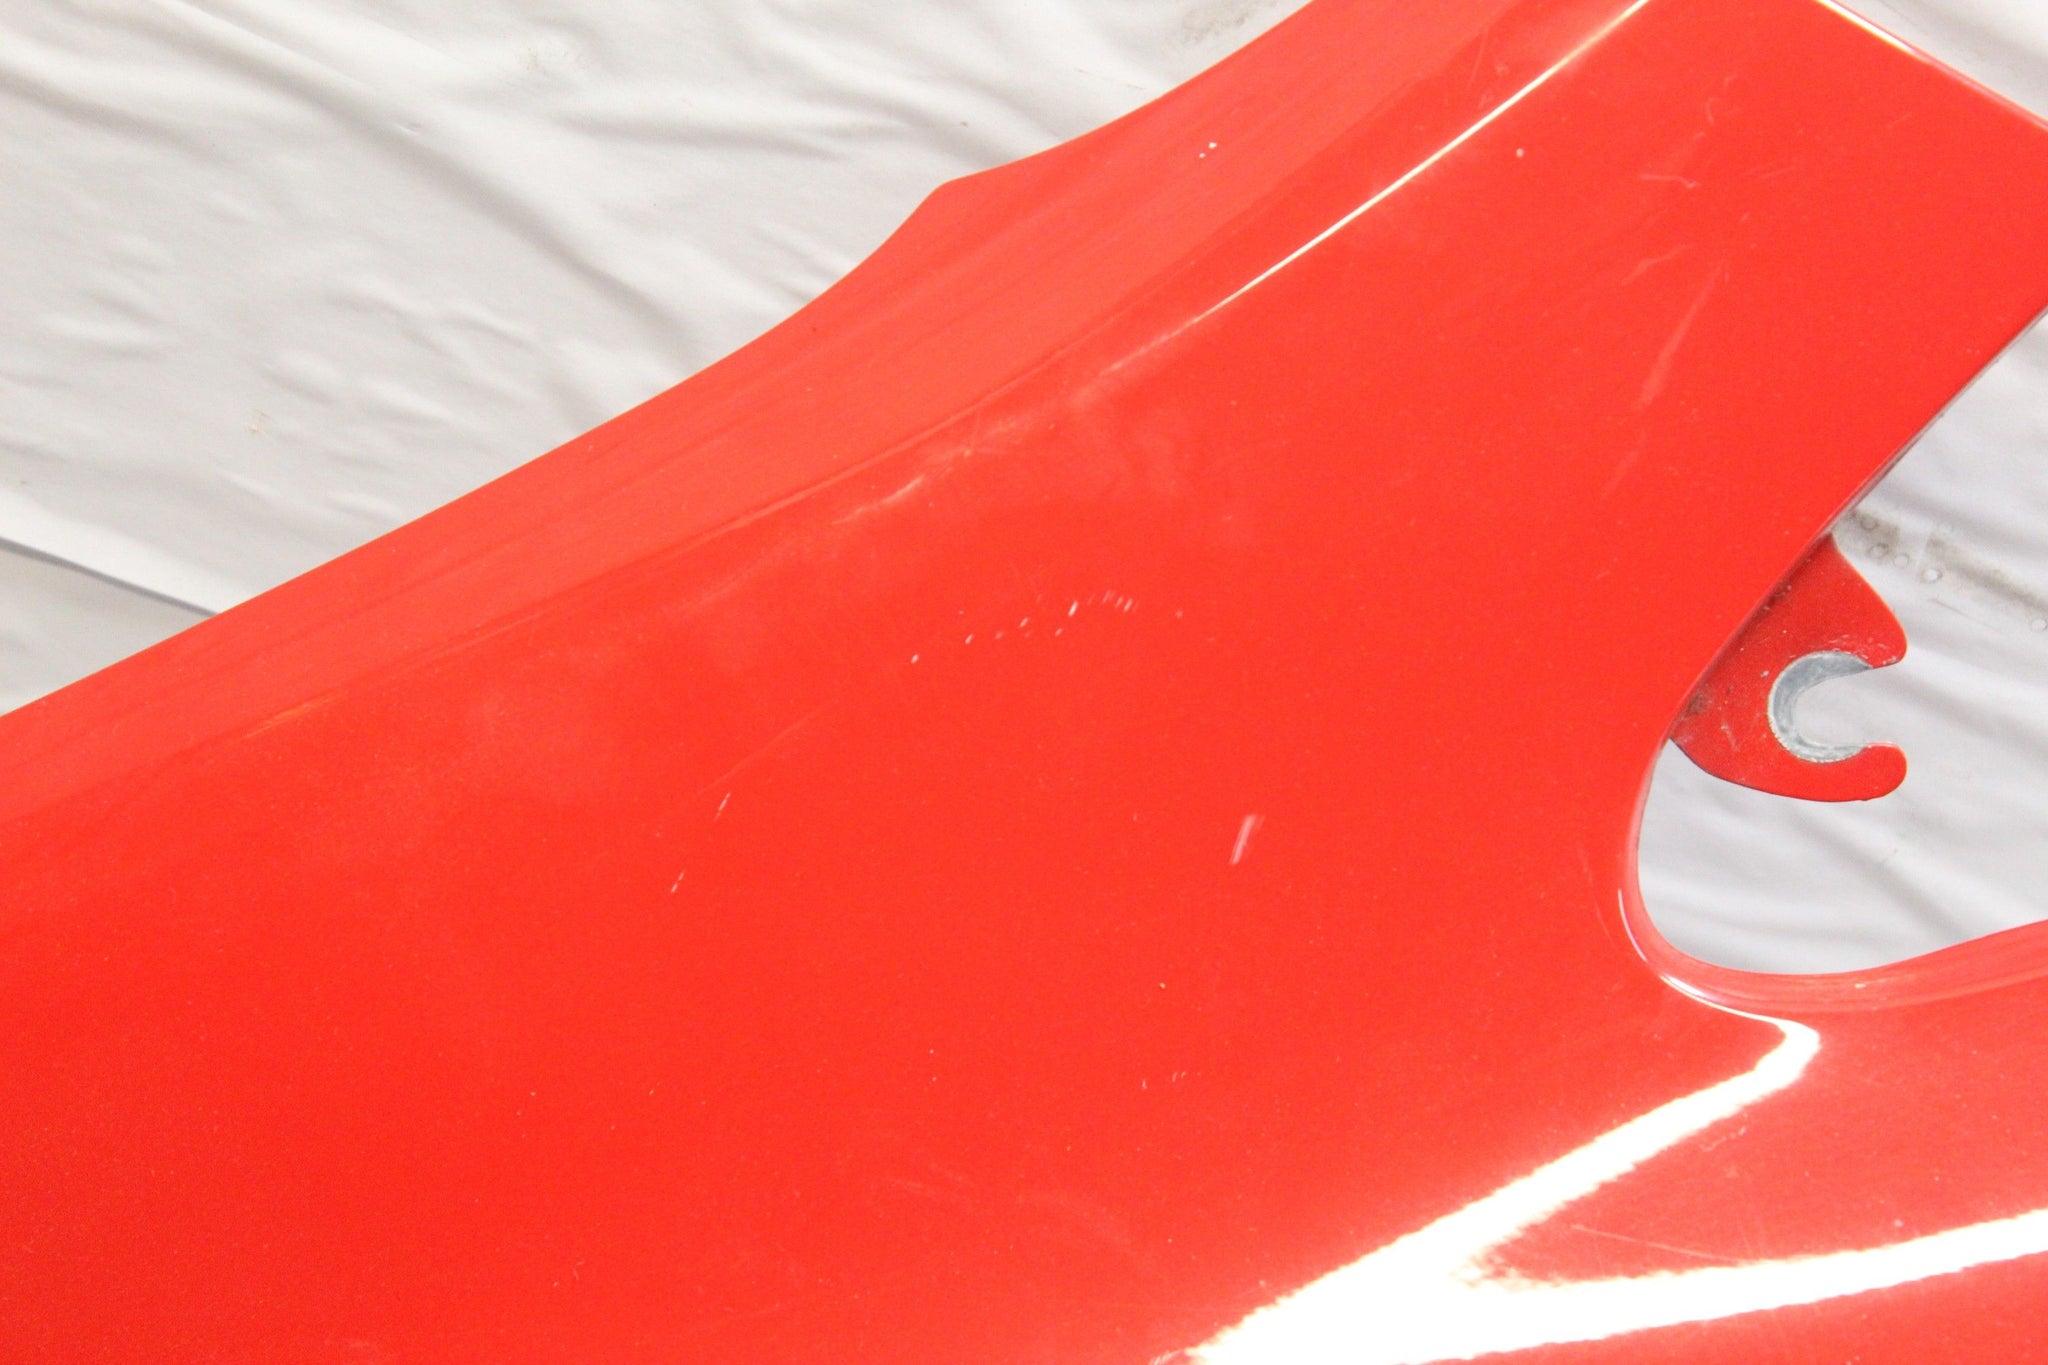 Vauxhall Corsa D wing left side front 2013